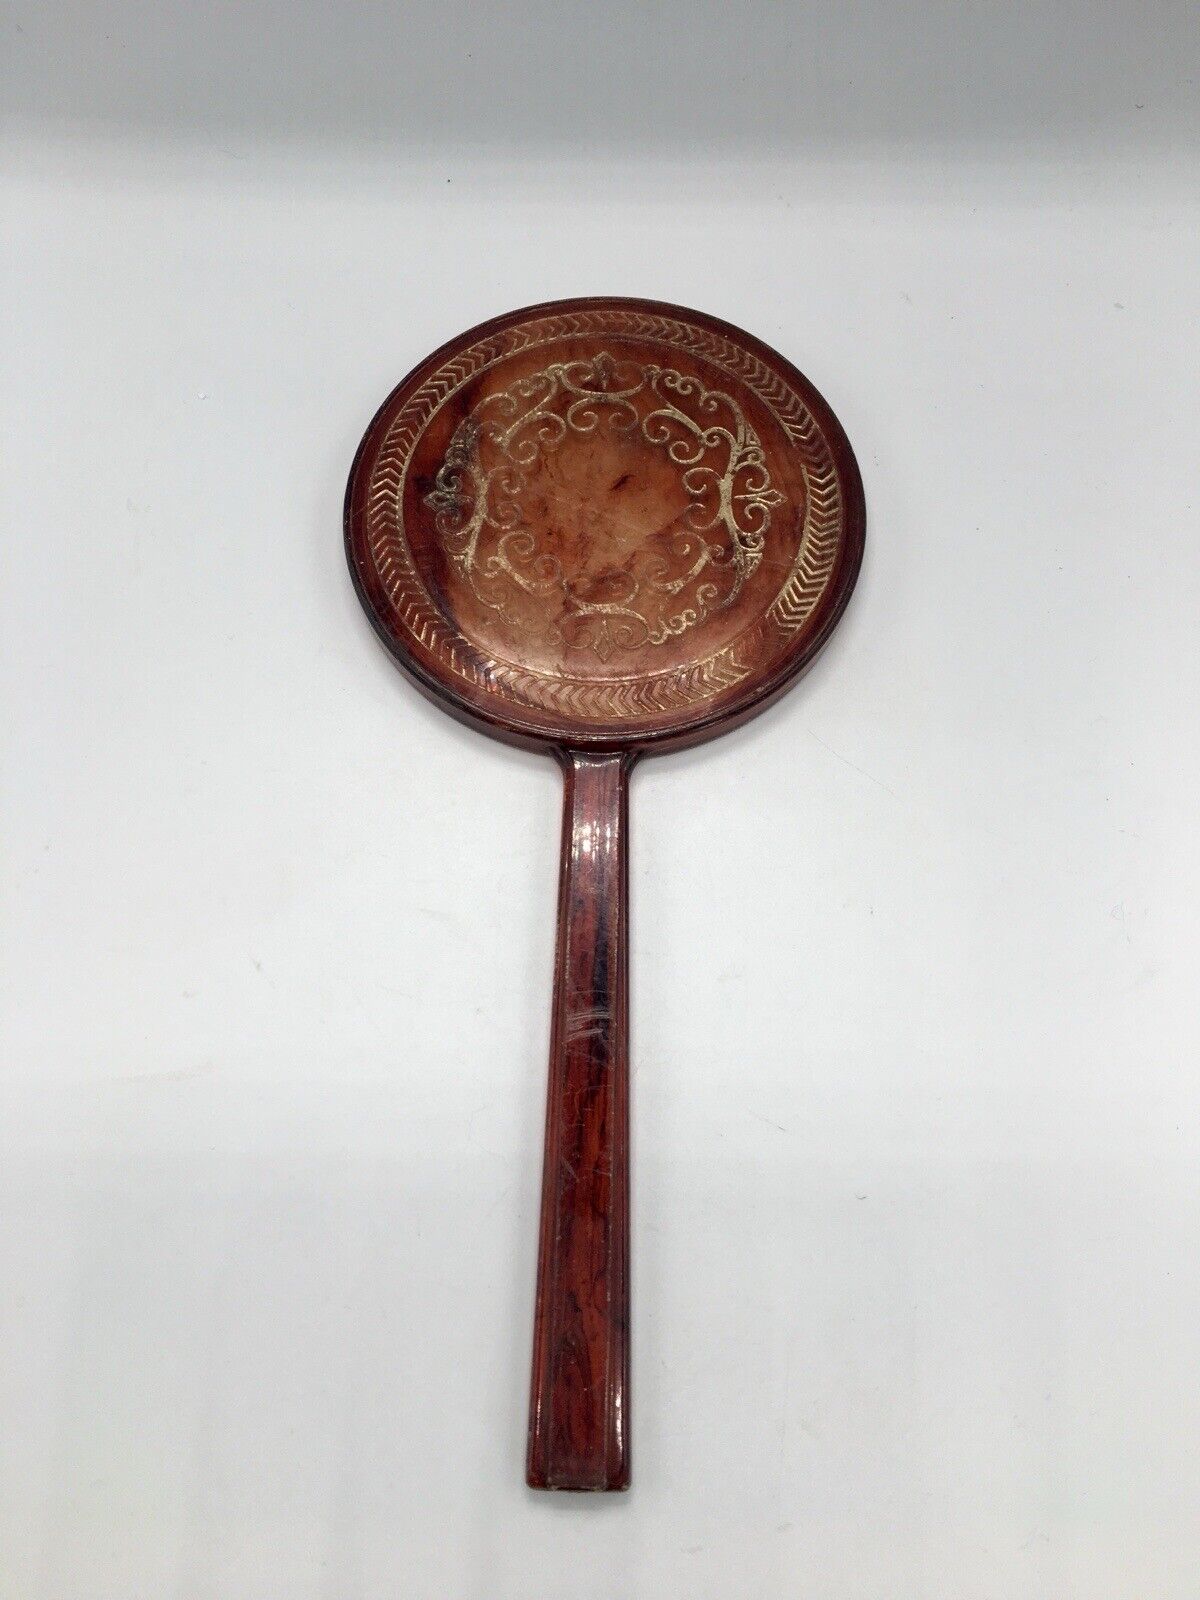 VTG 1950’s MCM Brown Celluloid Hand Mirror With Gold Etching. 10.5x5”